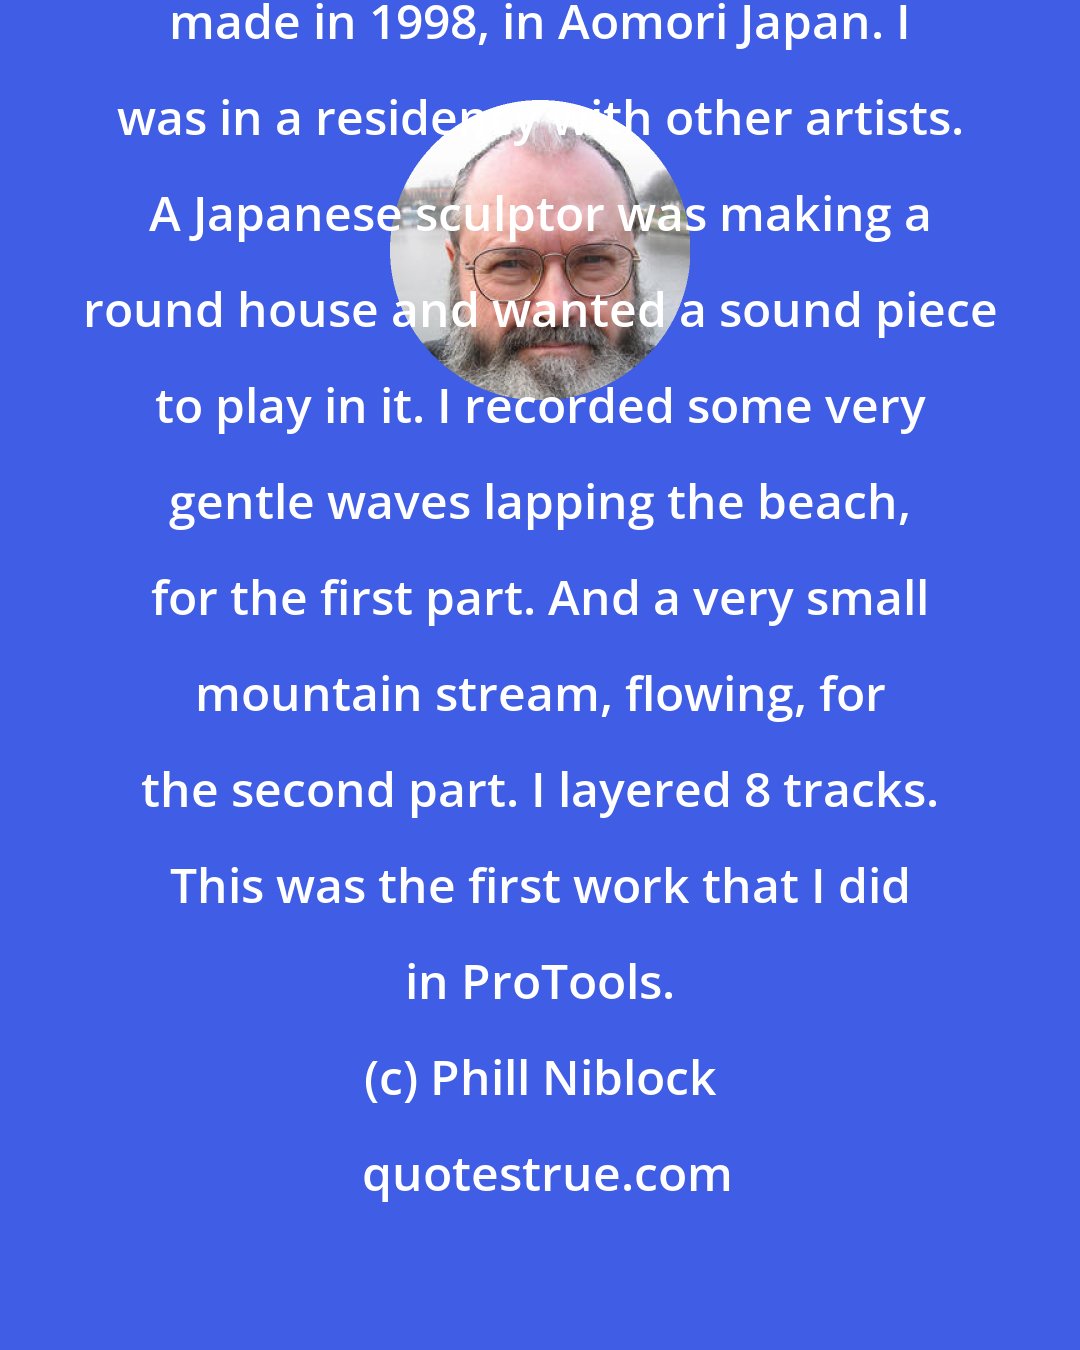 Phill Niblock: Aomori Water is a sound collage piece made in 1998, in Aomori Japan. I was in a residency with other artists. A Japanese sculptor was making a round house and wanted a sound piece to play in it. I recorded some very gentle waves lapping the beach, for the first part. And a very small mountain stream, flowing, for the second part. I layered 8 tracks. This was the first work that I did in ProTools.